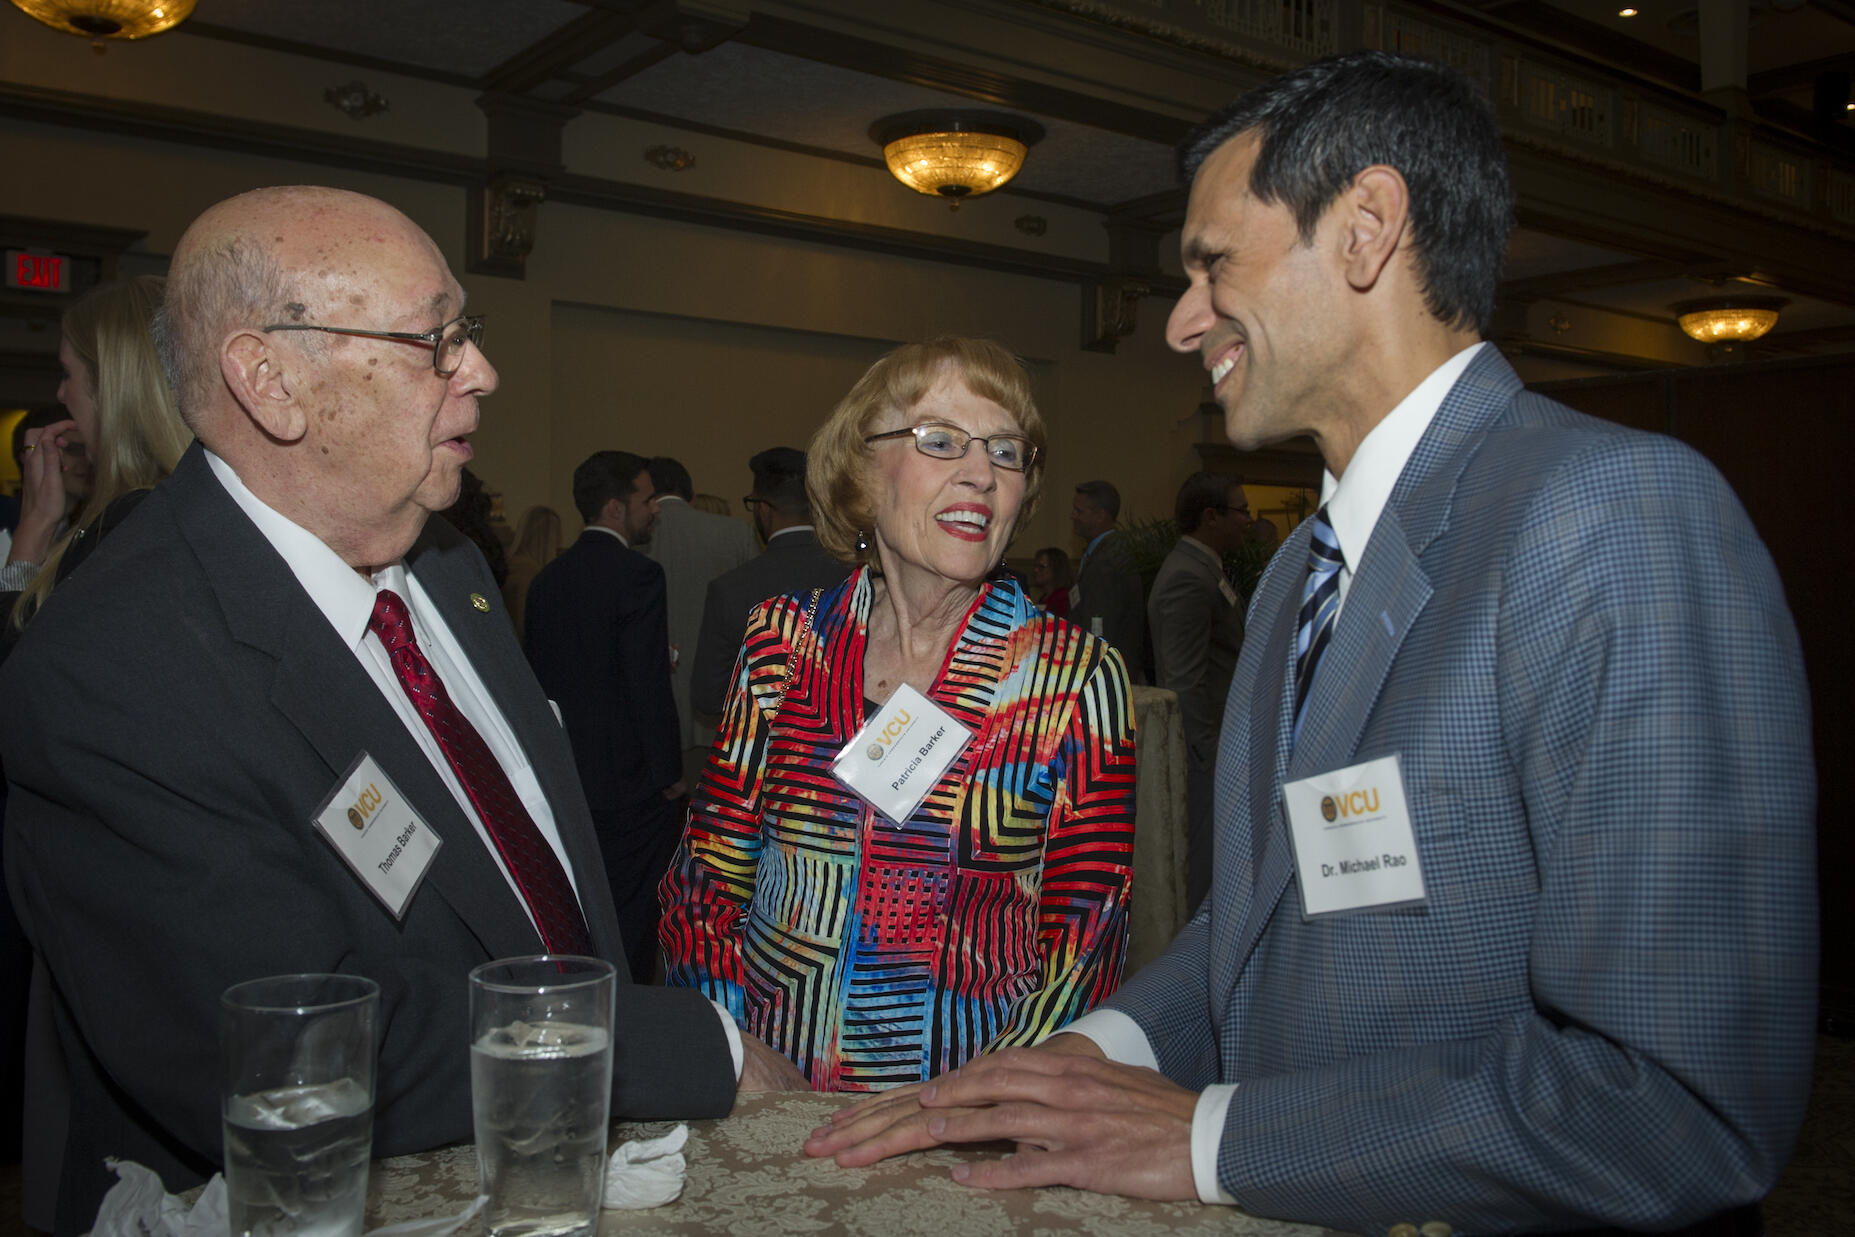 VCU President Michael Rao, Ph.D. (right), Thomas Barker, Ph.D. (left), and his wife Patricia (center).